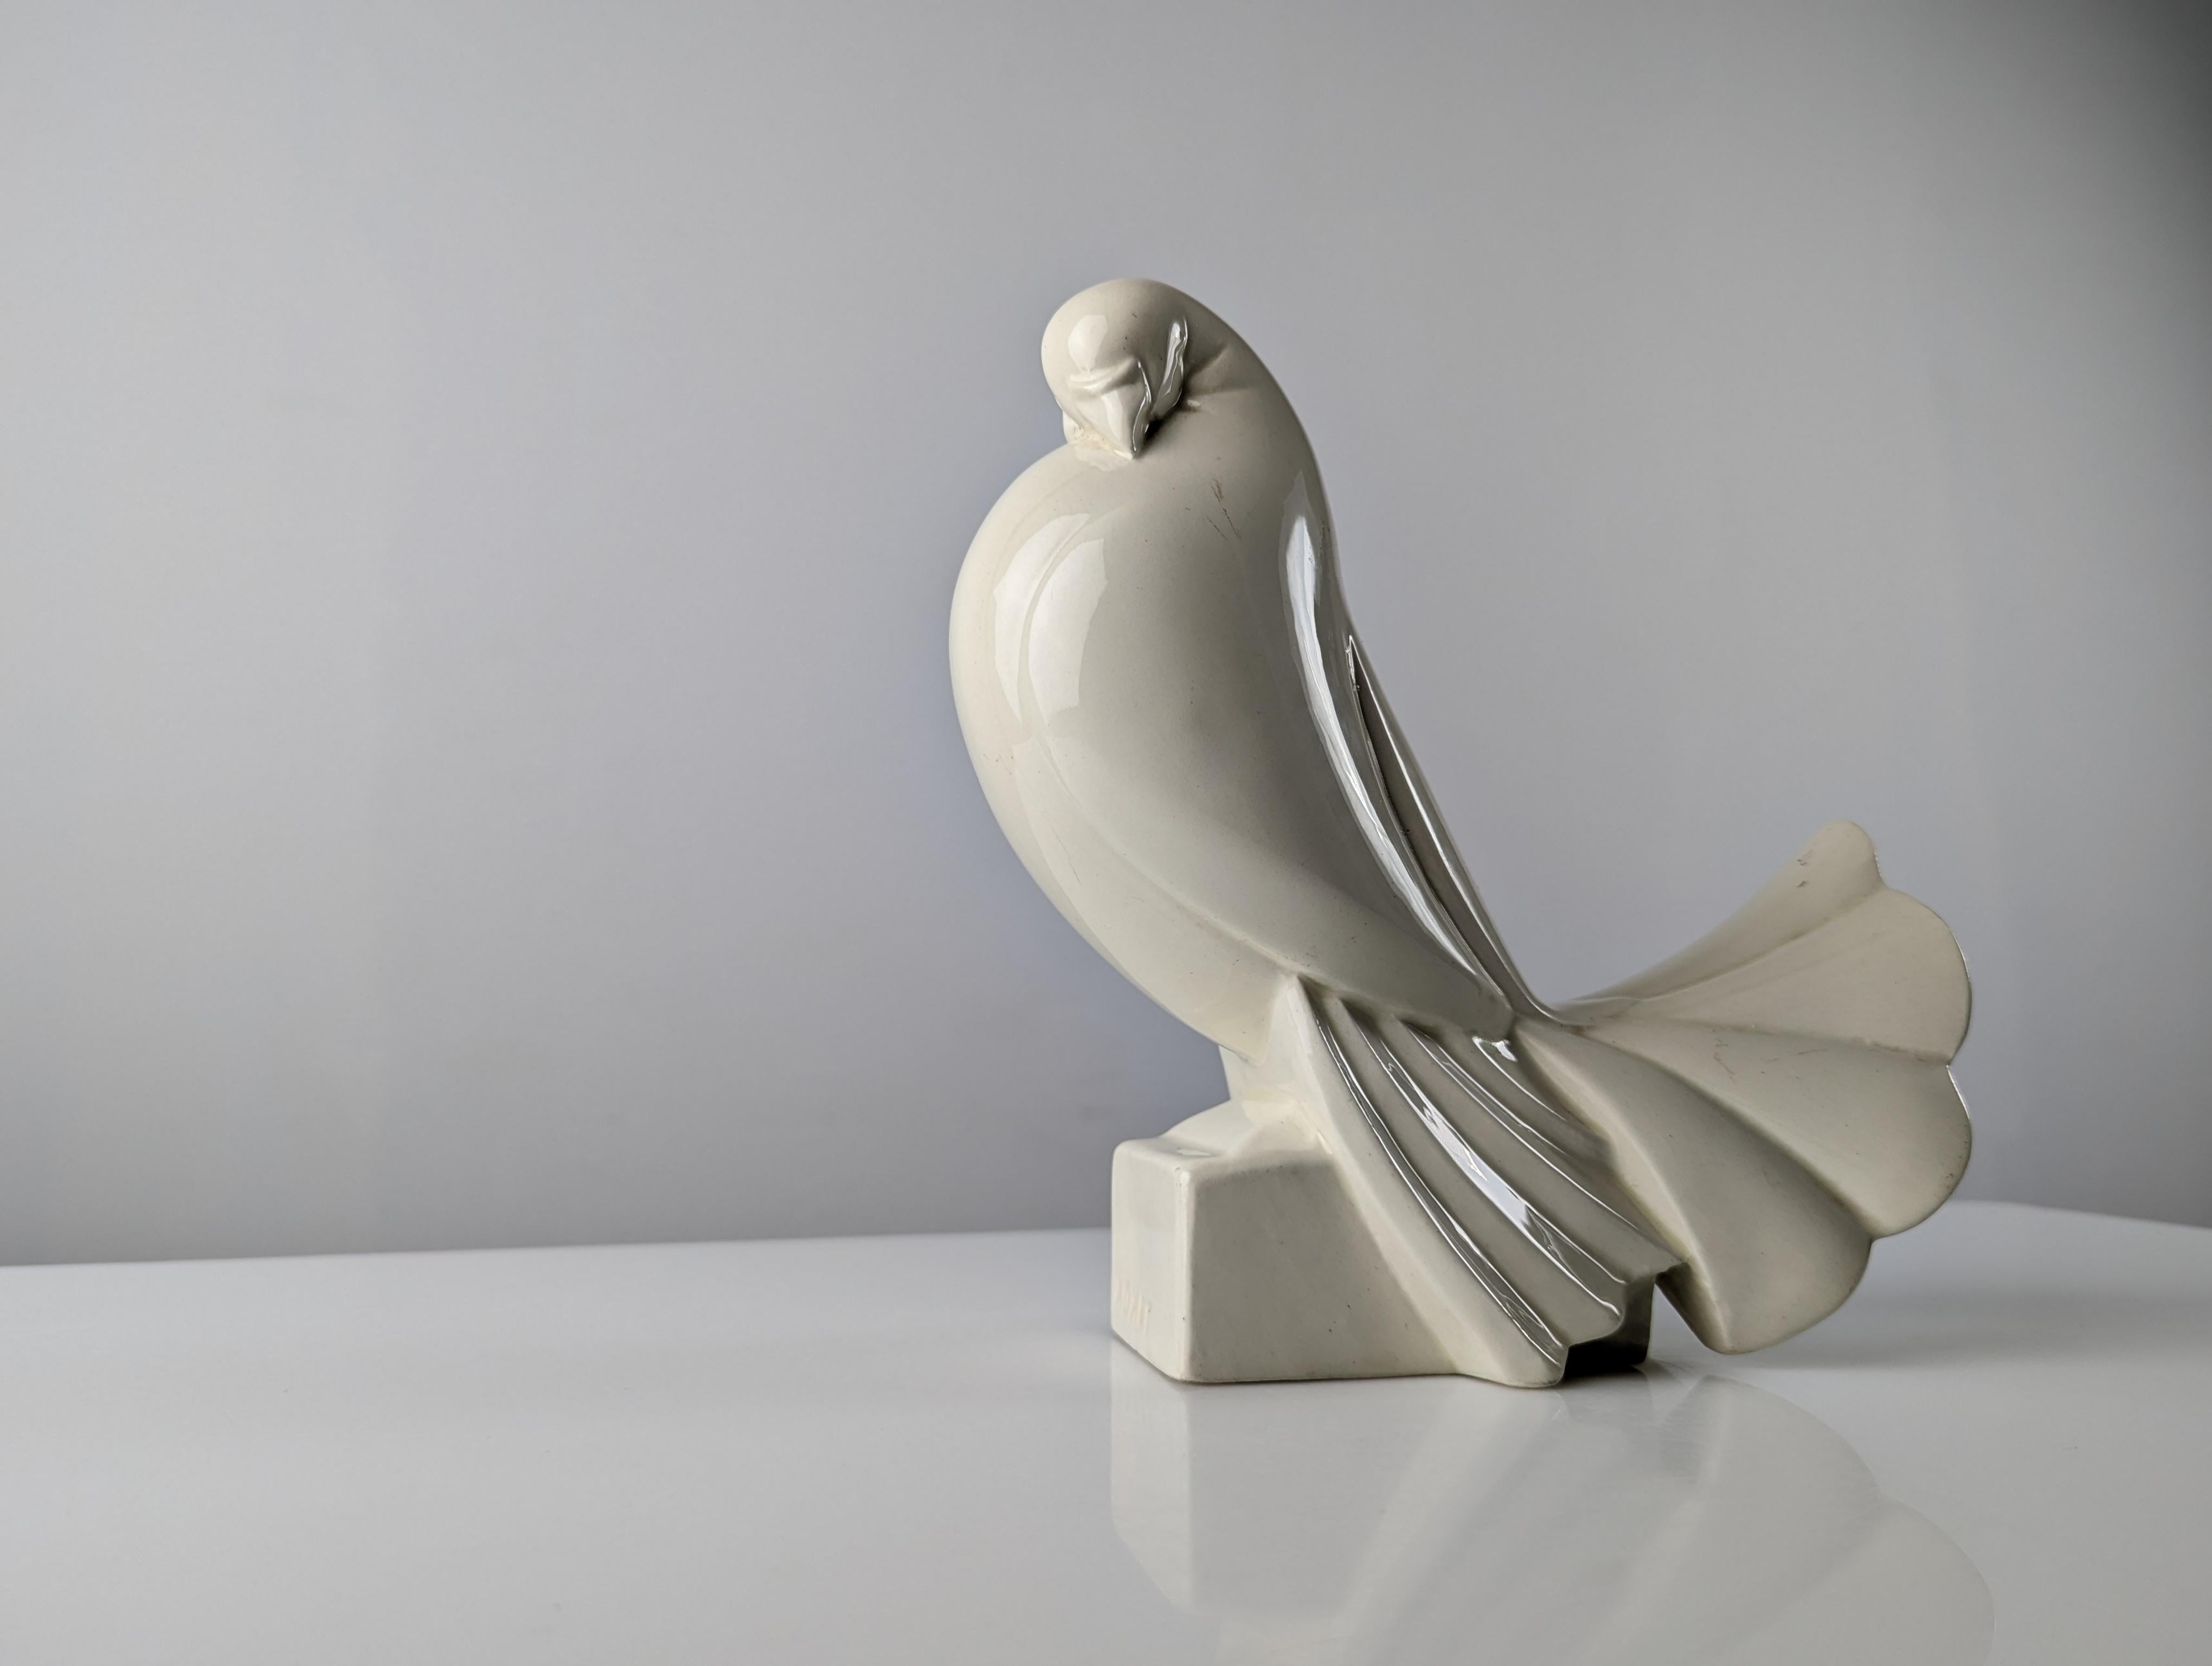 Extraordinary ceramic dove by the renowned French artist and designer Jacques Adnet and exhibited for the first time at the 1925 International Exhibition of Decorative Arts and Modern Industries in Paris, specifically in the ladies' room of La